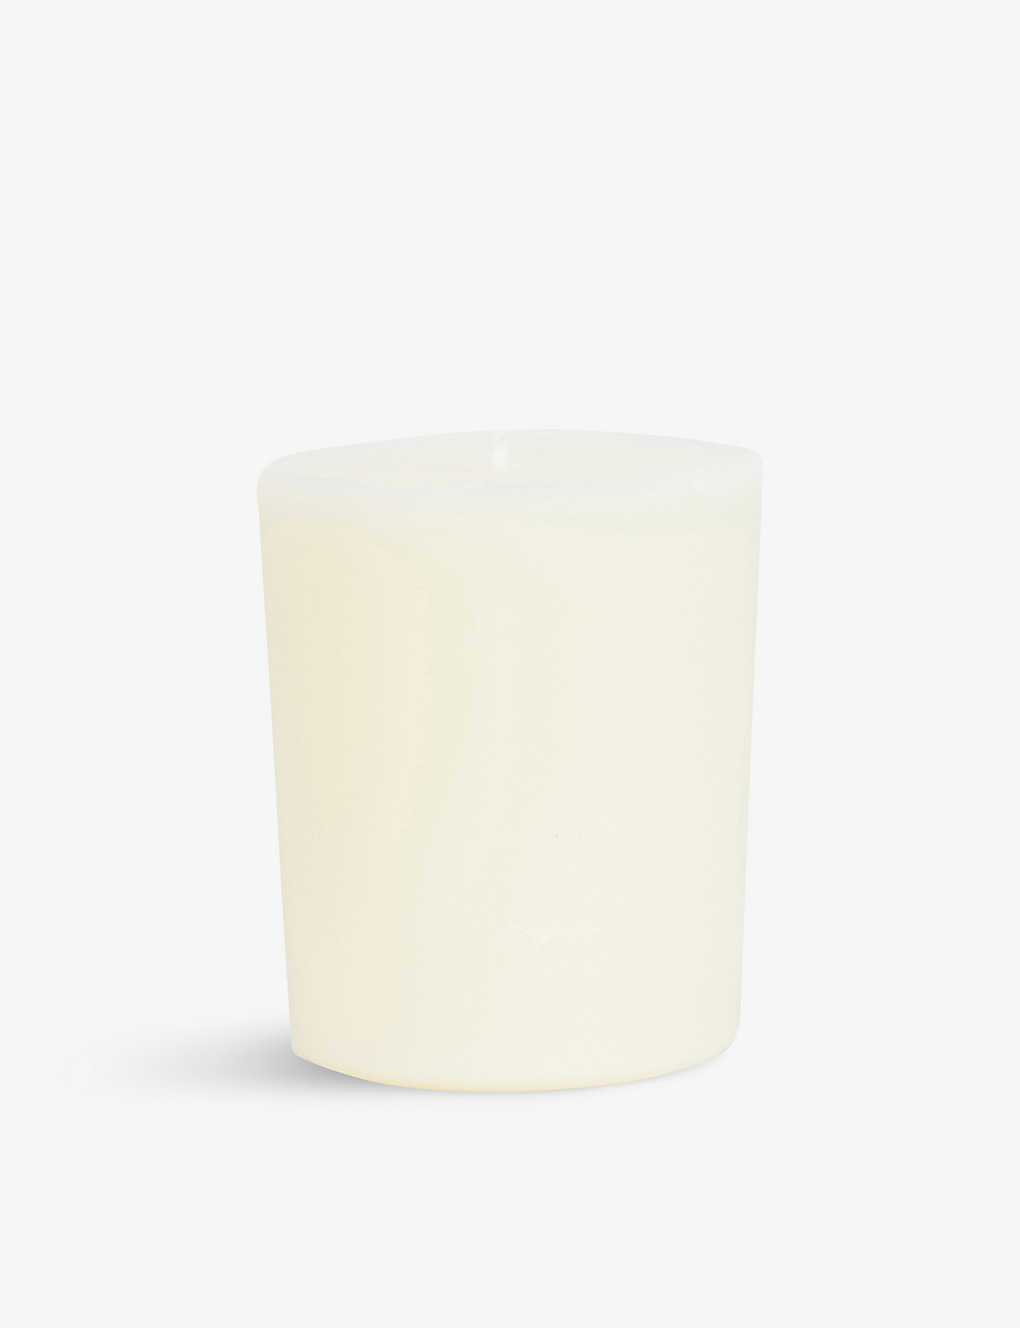 D'orsay Dorsay 02:45 Enfin Seuls Scented Candle Refill 250g